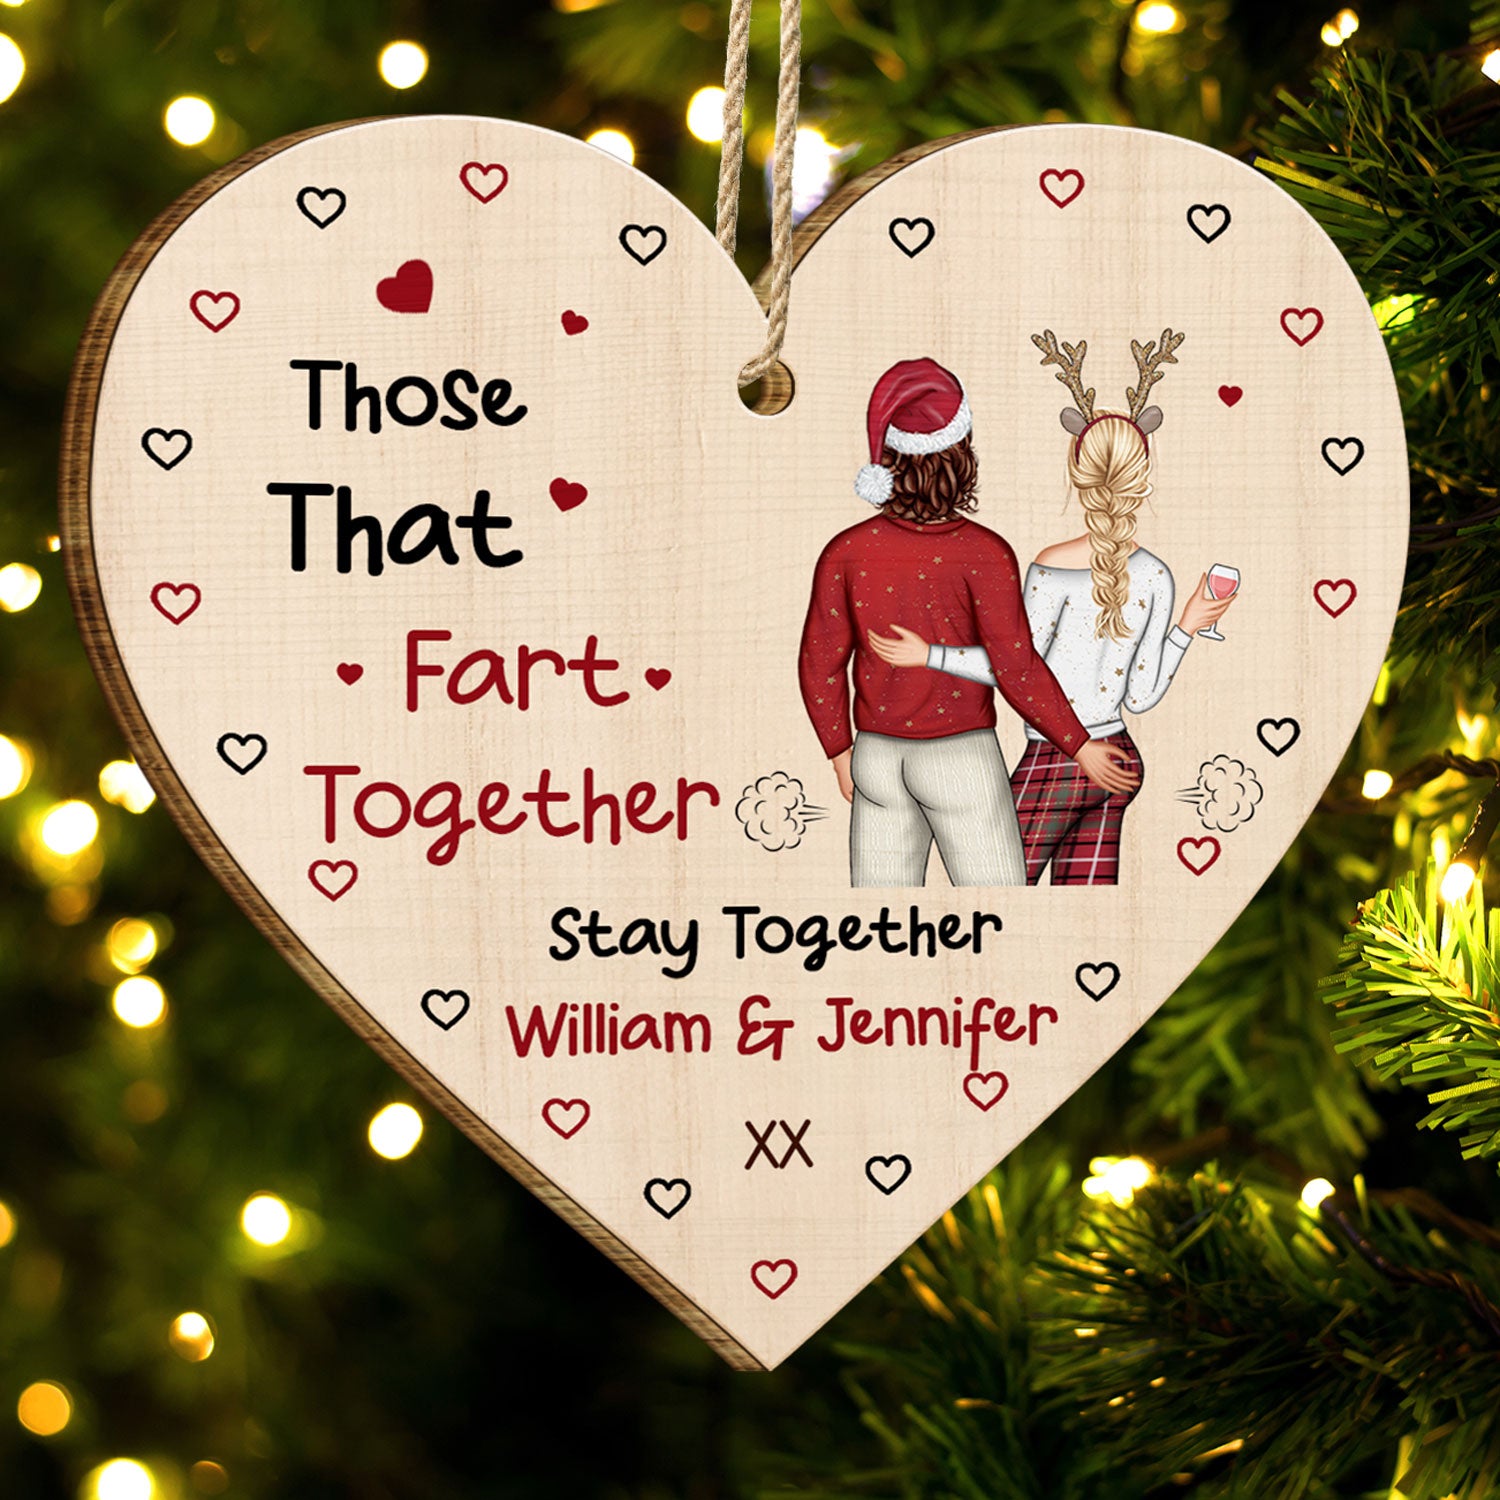 Those That Fart Together Stay Together - Funny Christmas Gift For Couples, Husband, Wife, Girlfriend, Boyfriend - Personalized Custom Shaped Wooden Ornament